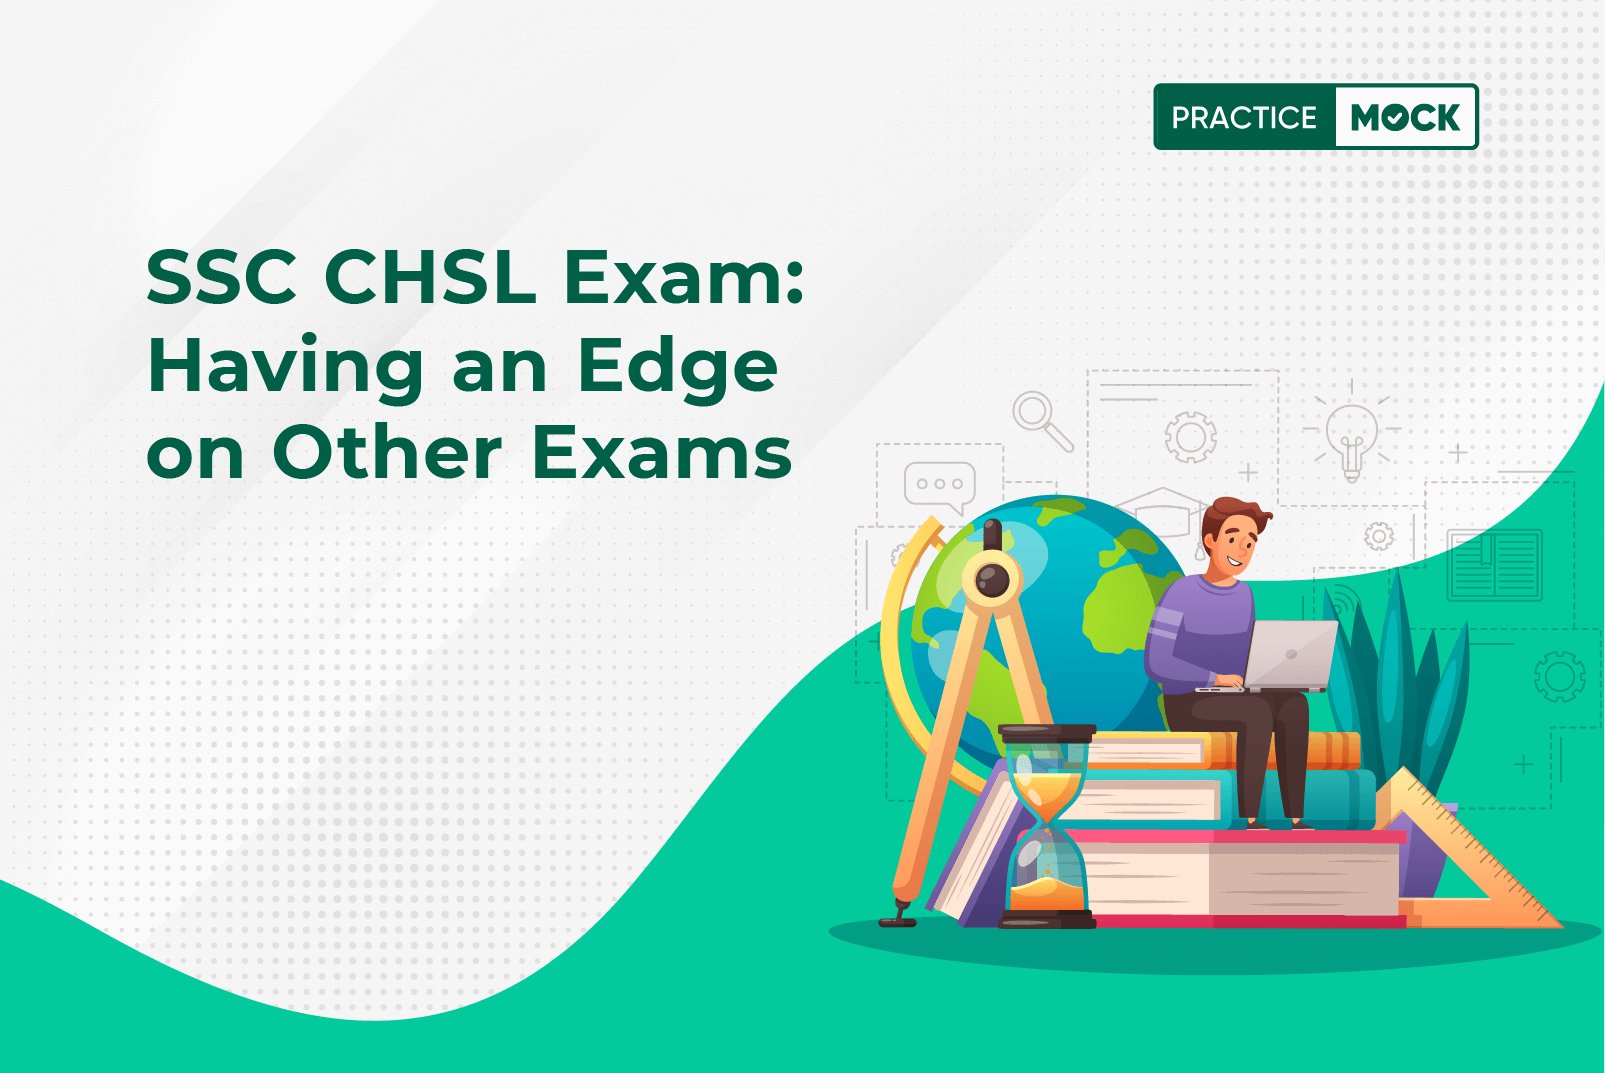 SSC CHSL Exam: Have an Edge on Other Exams